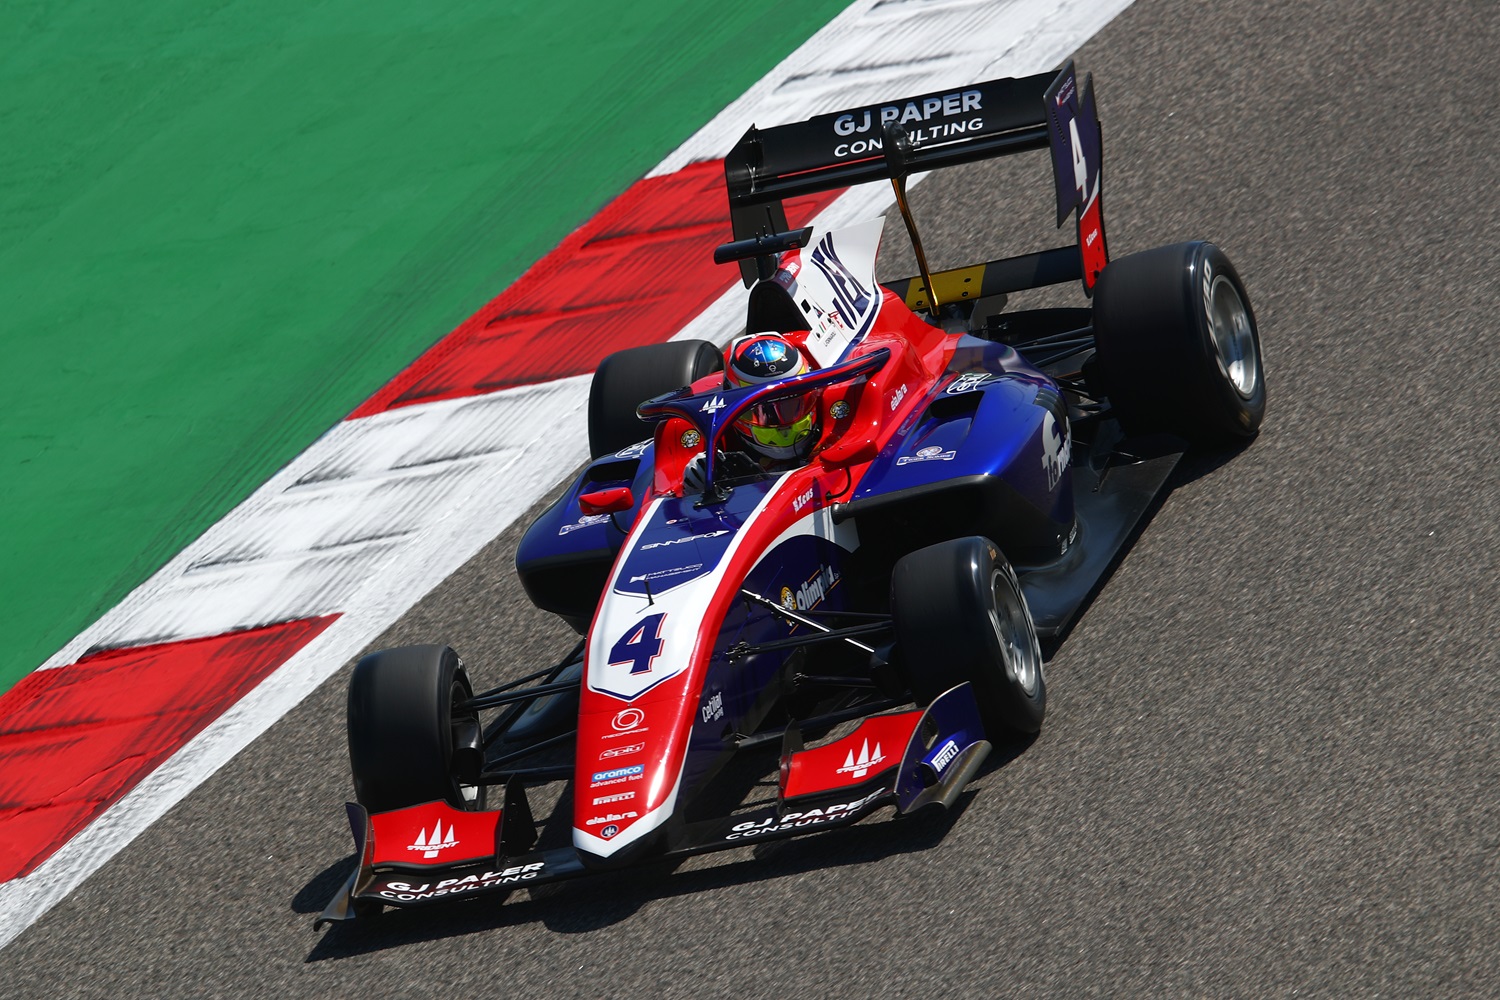 Trident and Art GP: F3 leaders without victory